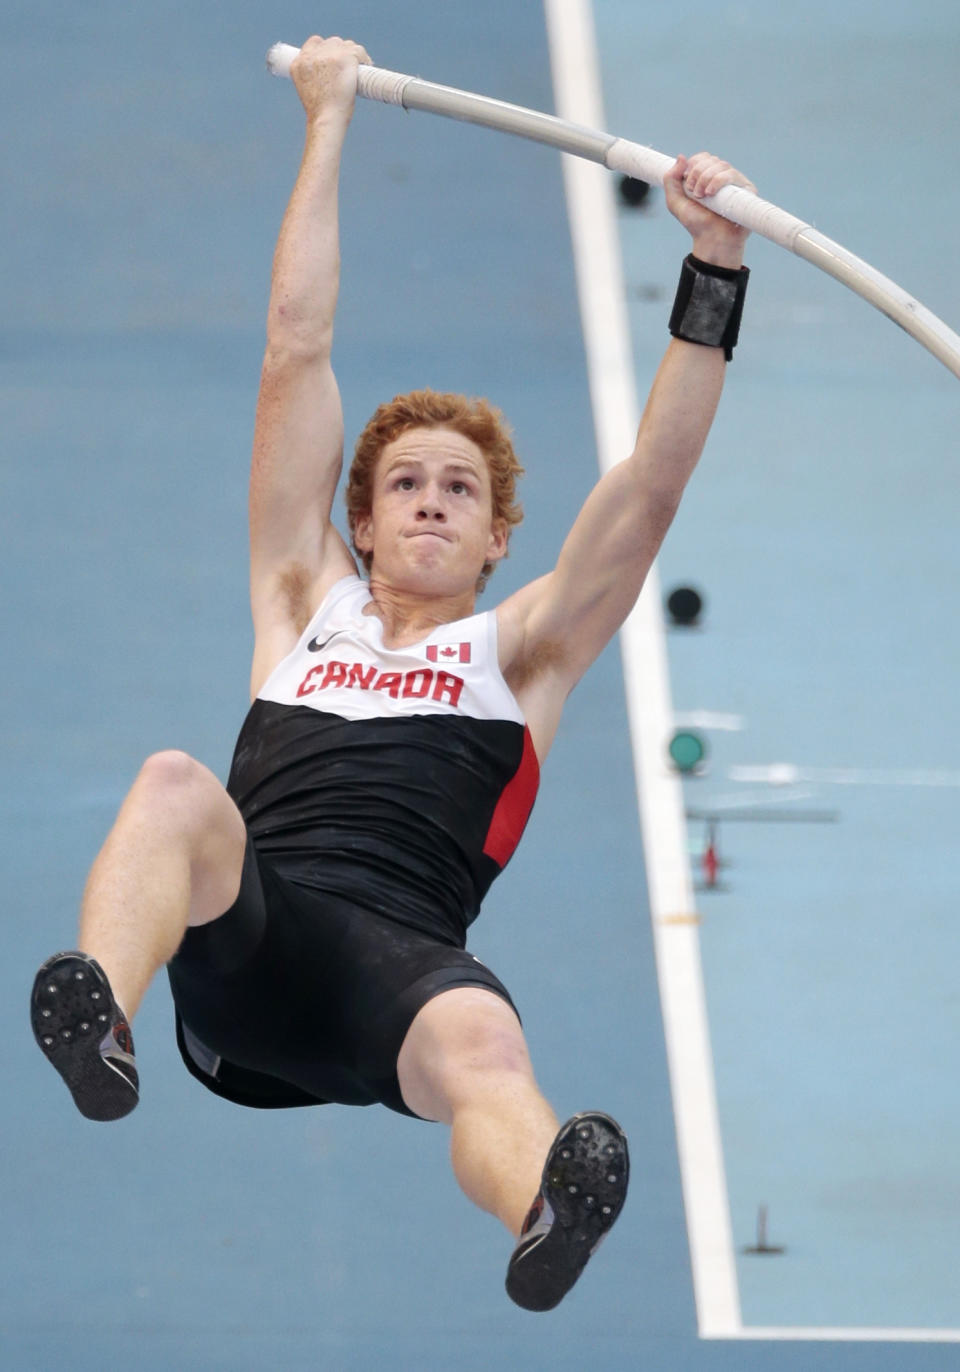 FILE - Canada's Shawn Barber competes in the men's pole vault qualification at the World Athletics Championships in the Luzhniki stadium in Moscow, Russia, Saturday, Aug. 10, 2013. Barber has died from medical complications. He was 29. Barber died Wednesday, Jan. 17, 2024, at home in Kingwood, Texas, his agent, Paul Doyle, confirmed to The Associated Press. (AP Photo/Ivan Sekretarev, File)